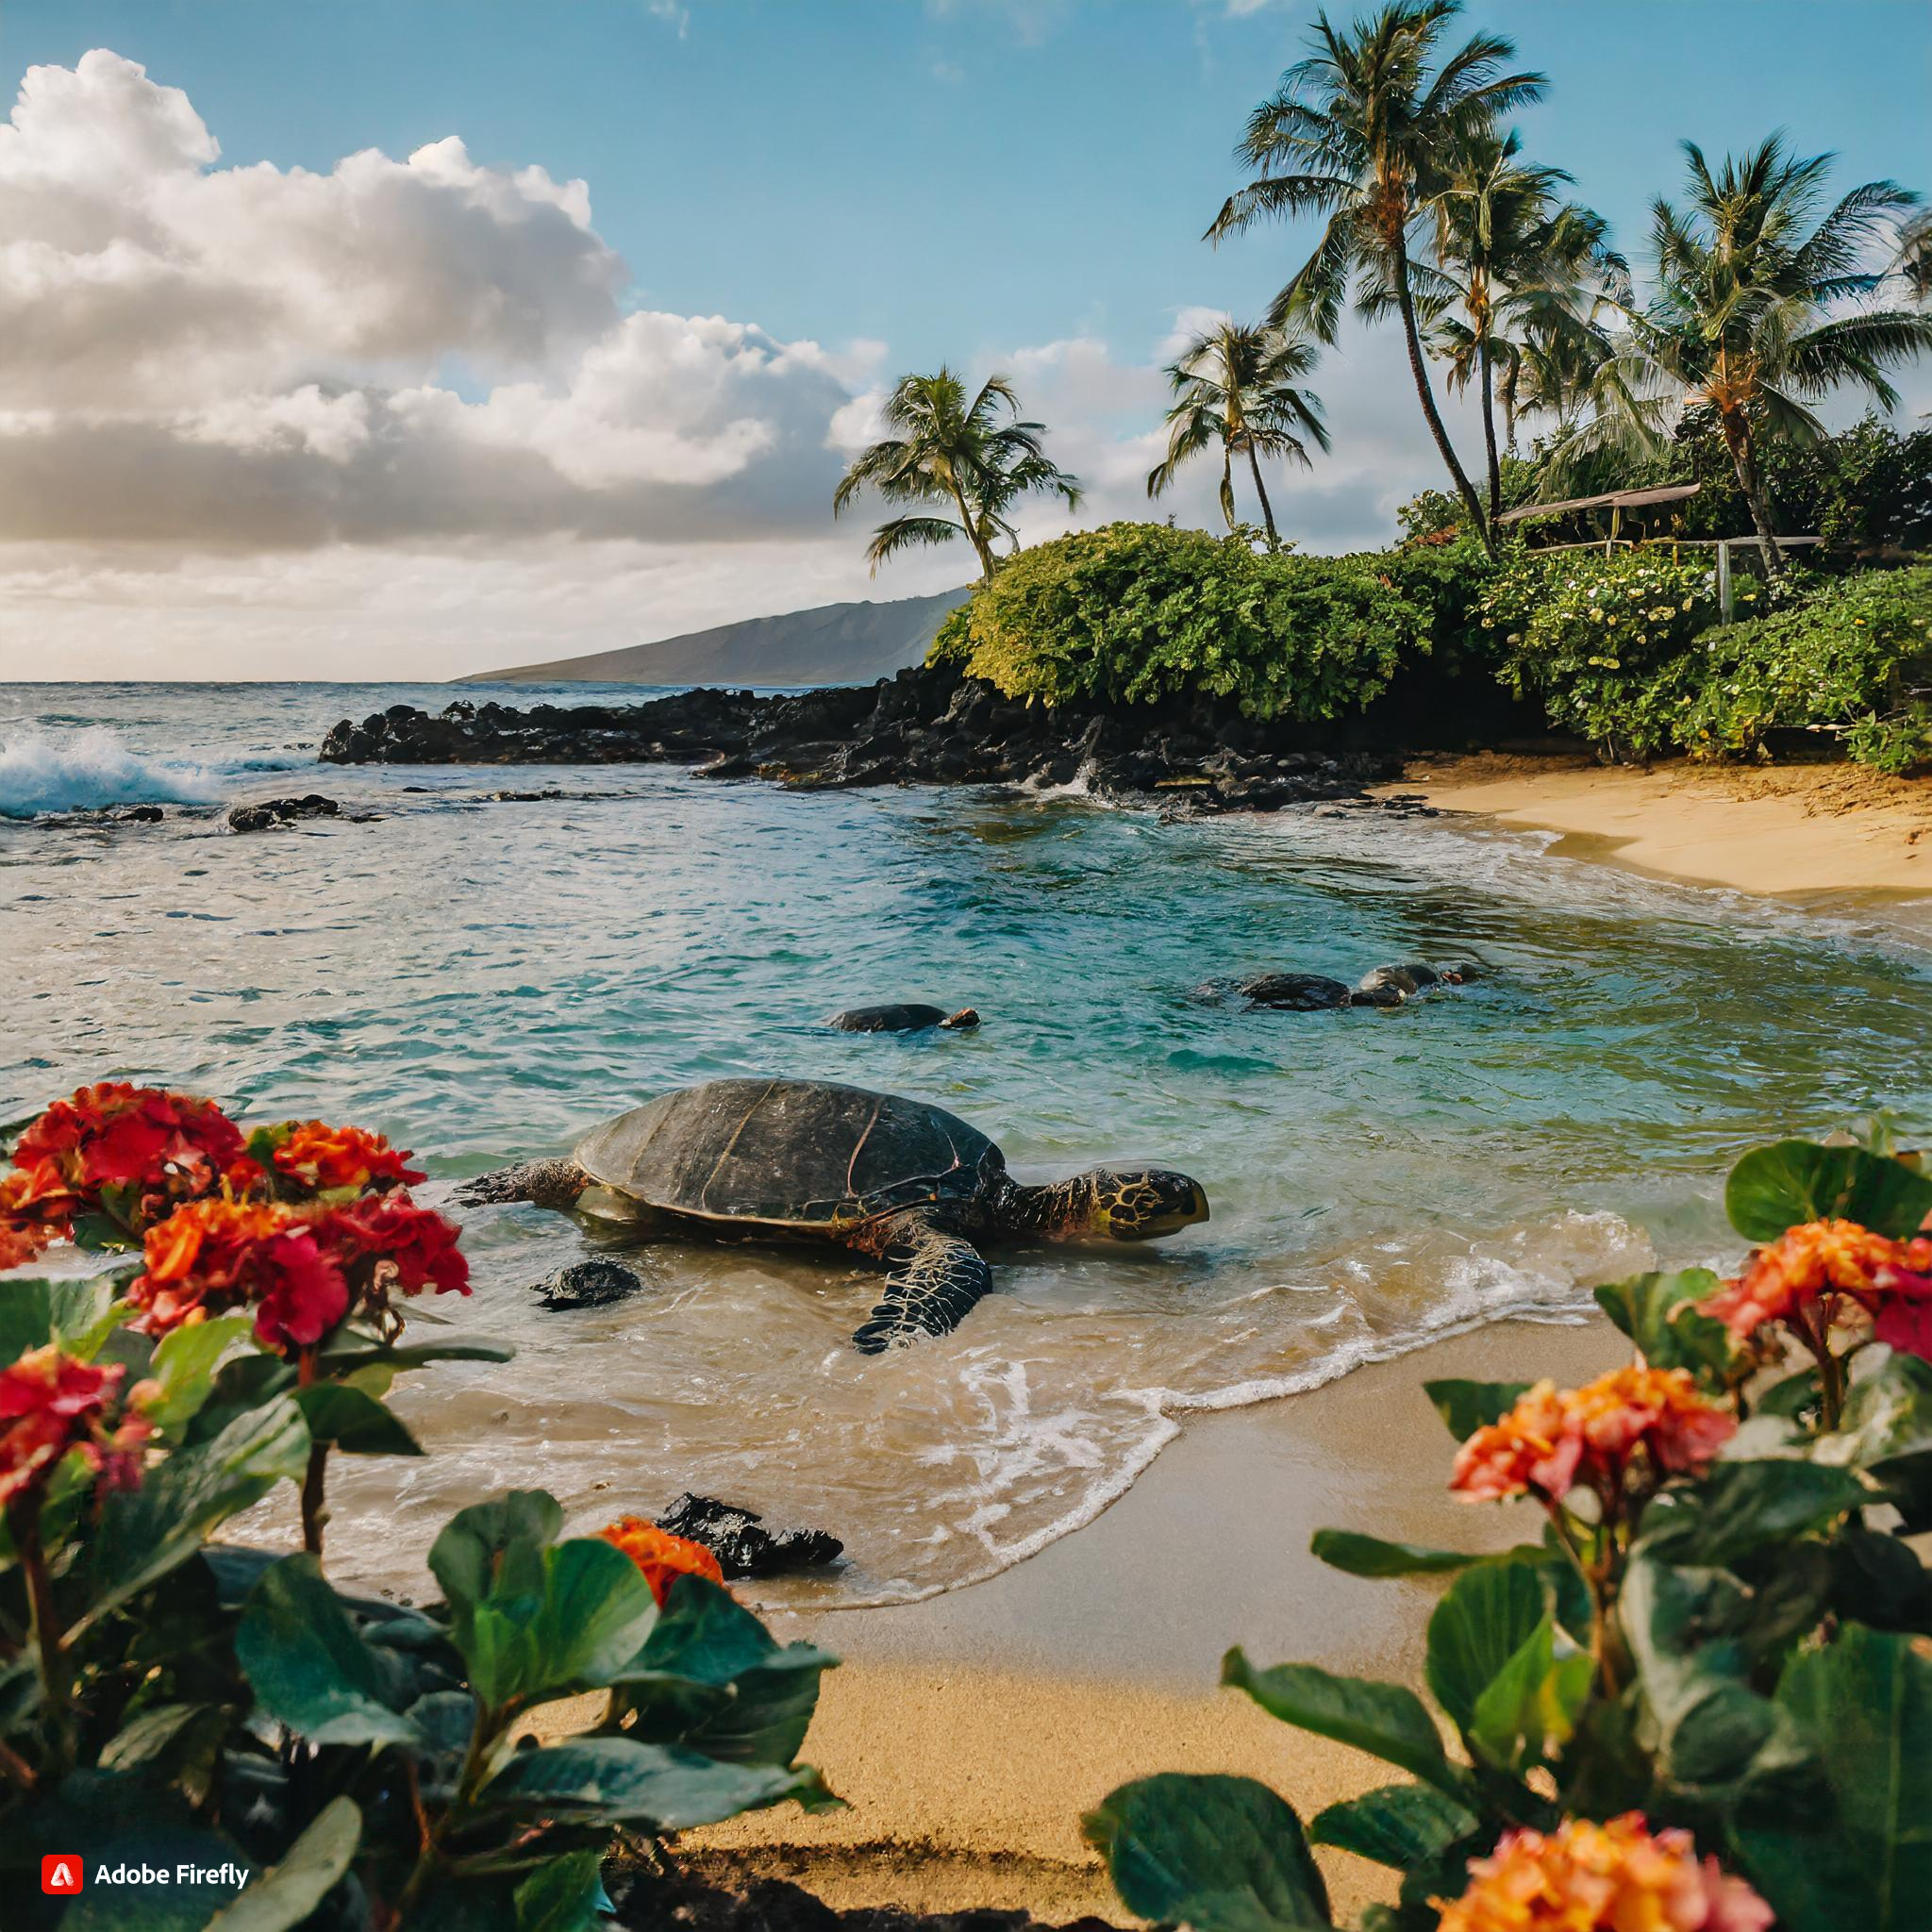 Firefly hawaii landscape by the beach with flowers and turtles in the water 49333.jpg